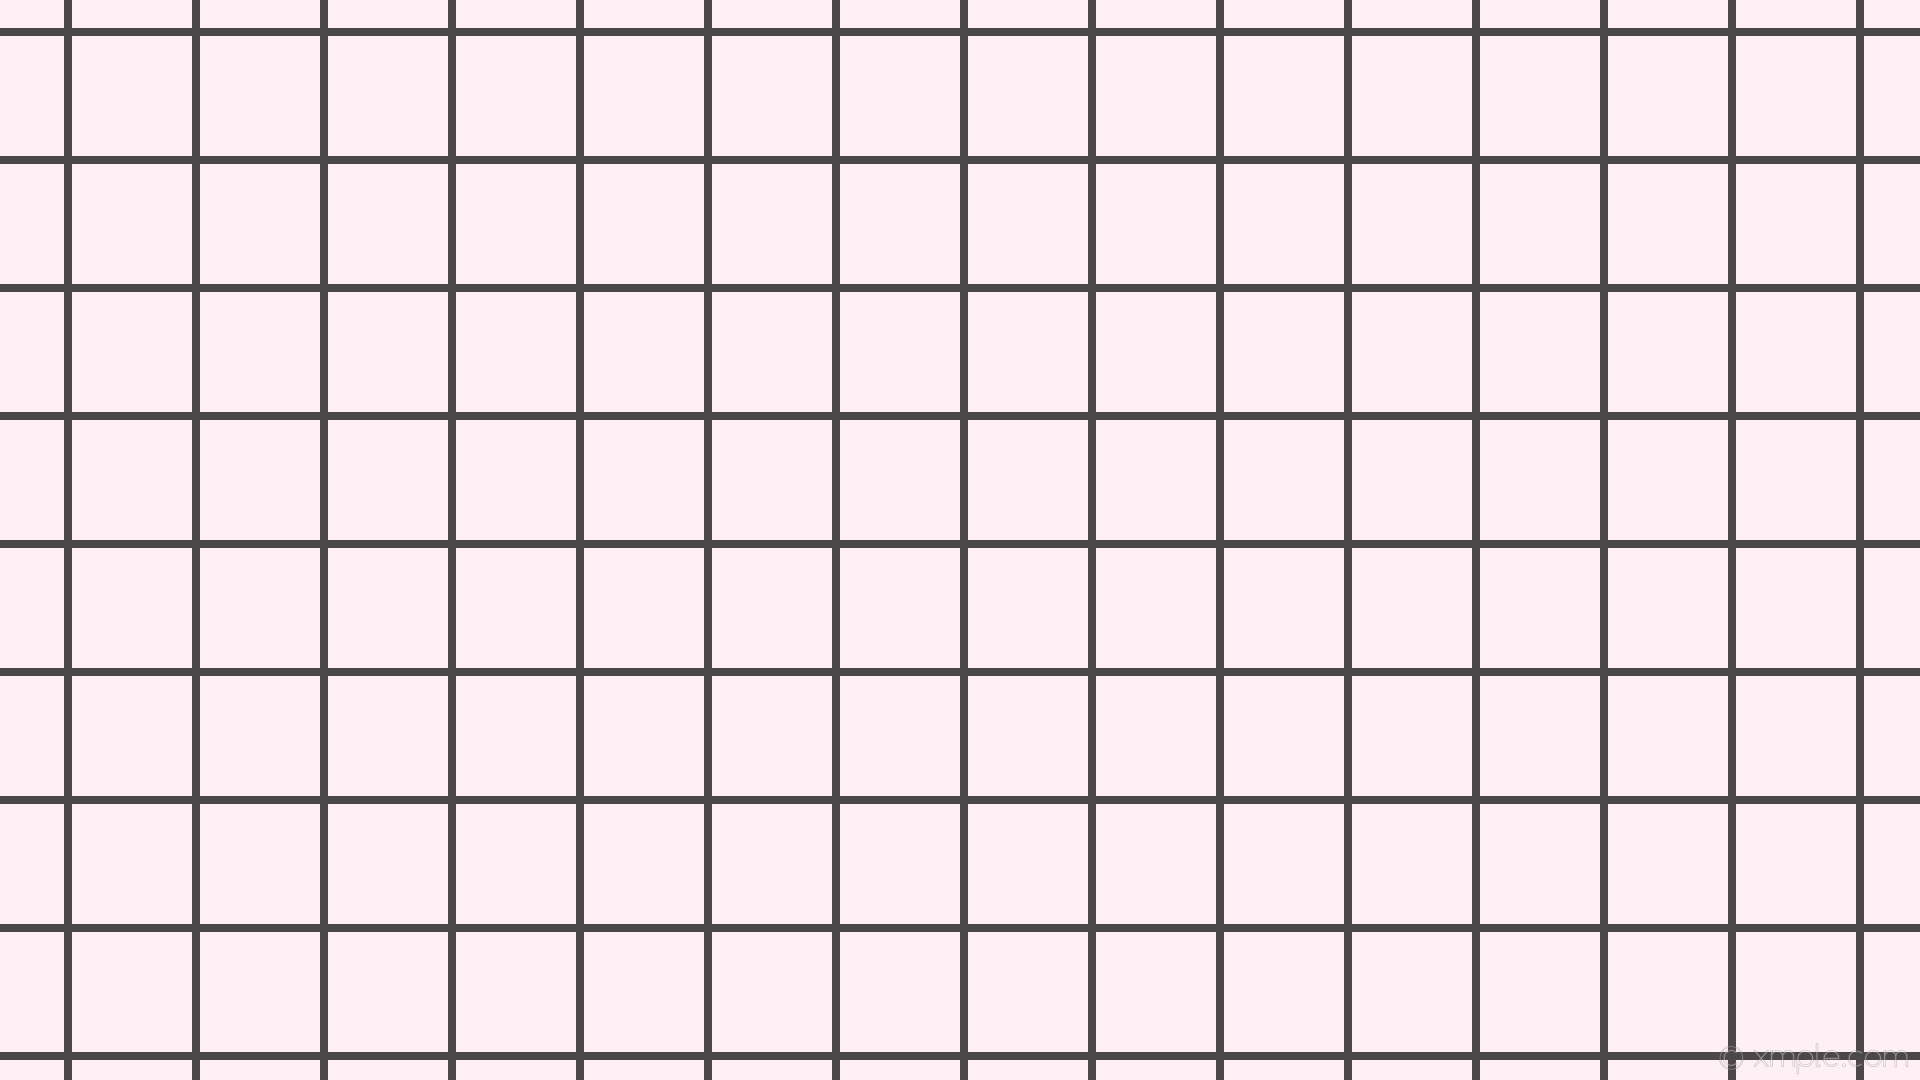 A pink grid with black lines - Grid